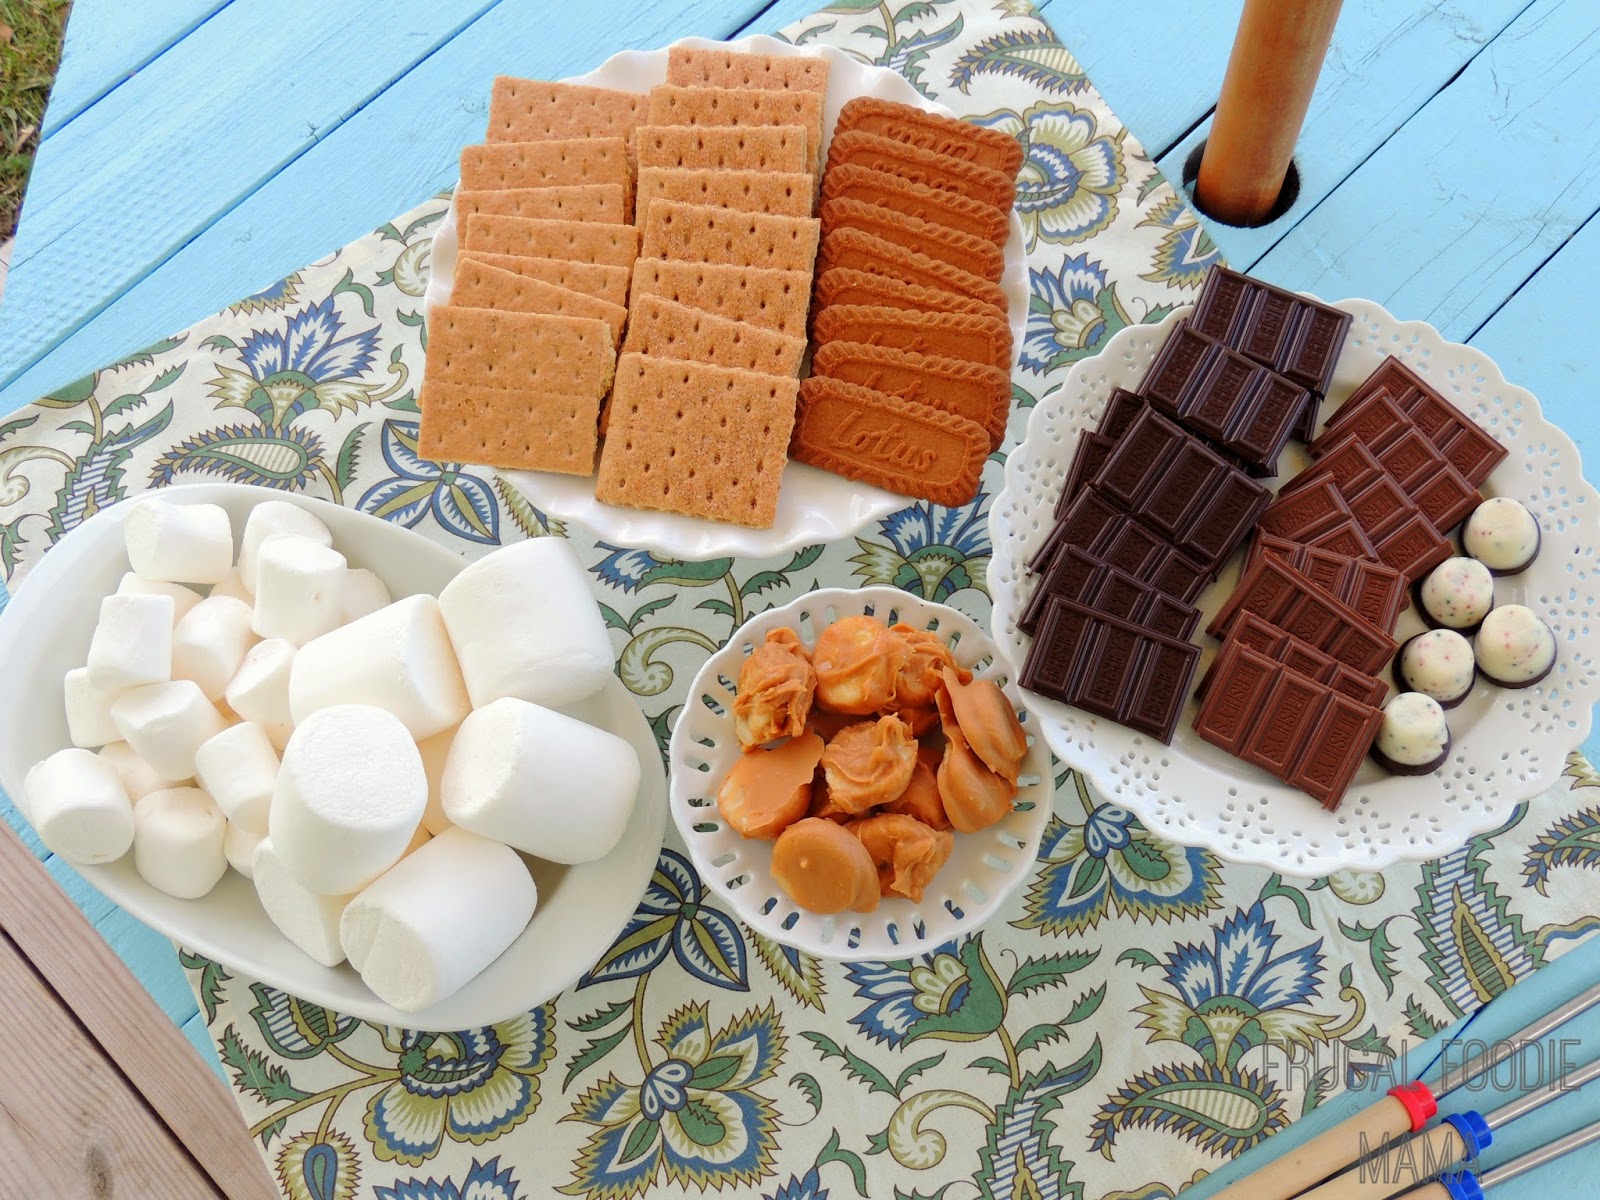 Forget plain ole s'mores this summer! Really wow your backyard guests by throwing a Fancy S'mores Outdoor Oasis Party.